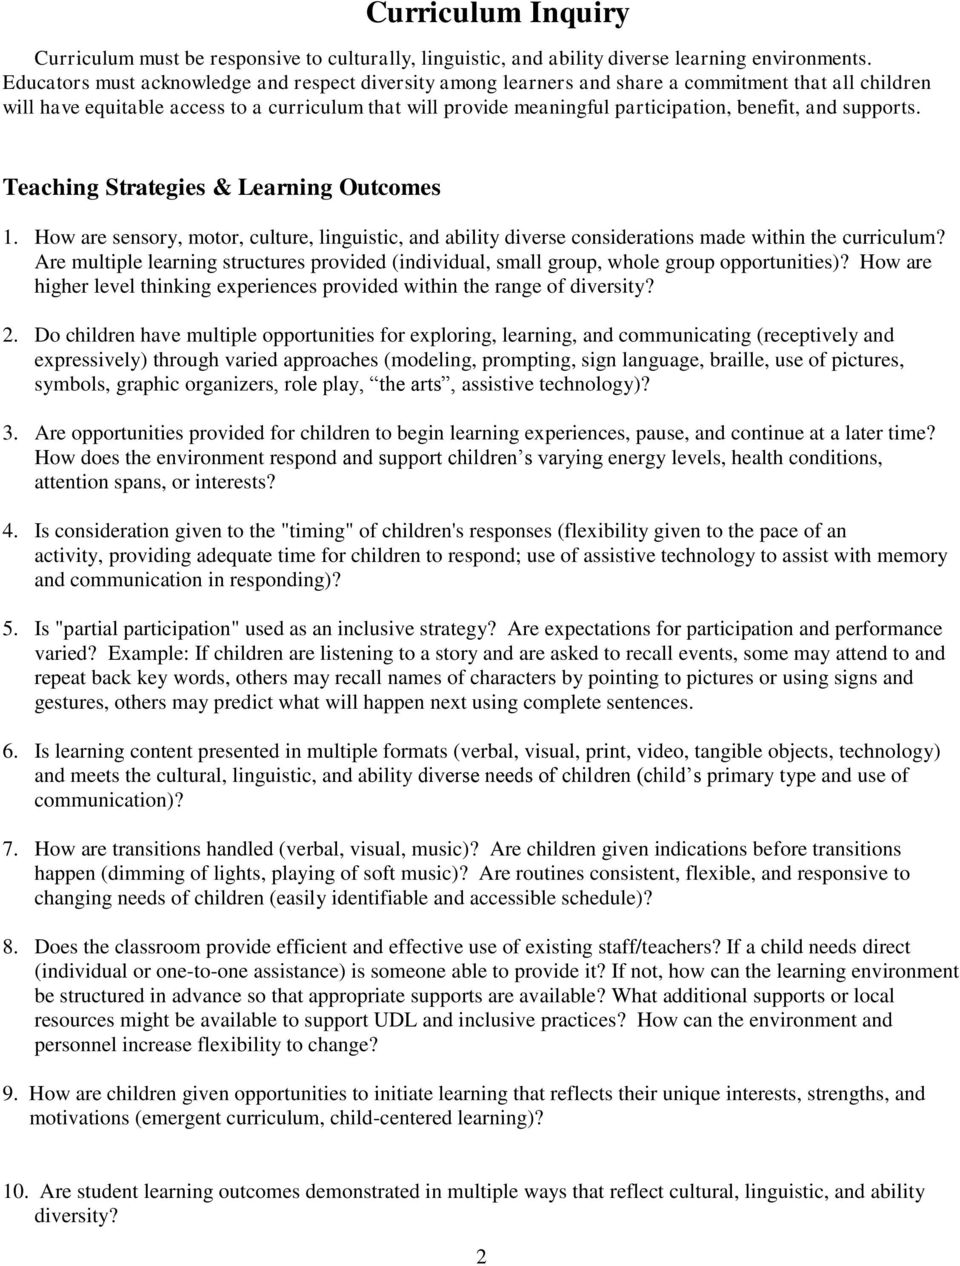 benefit, and supports. Teaching Strategies & Learning Outcomes 1. How are sensory, motor, culture, linguistic, and ability diverse considerations made within the curriculum?